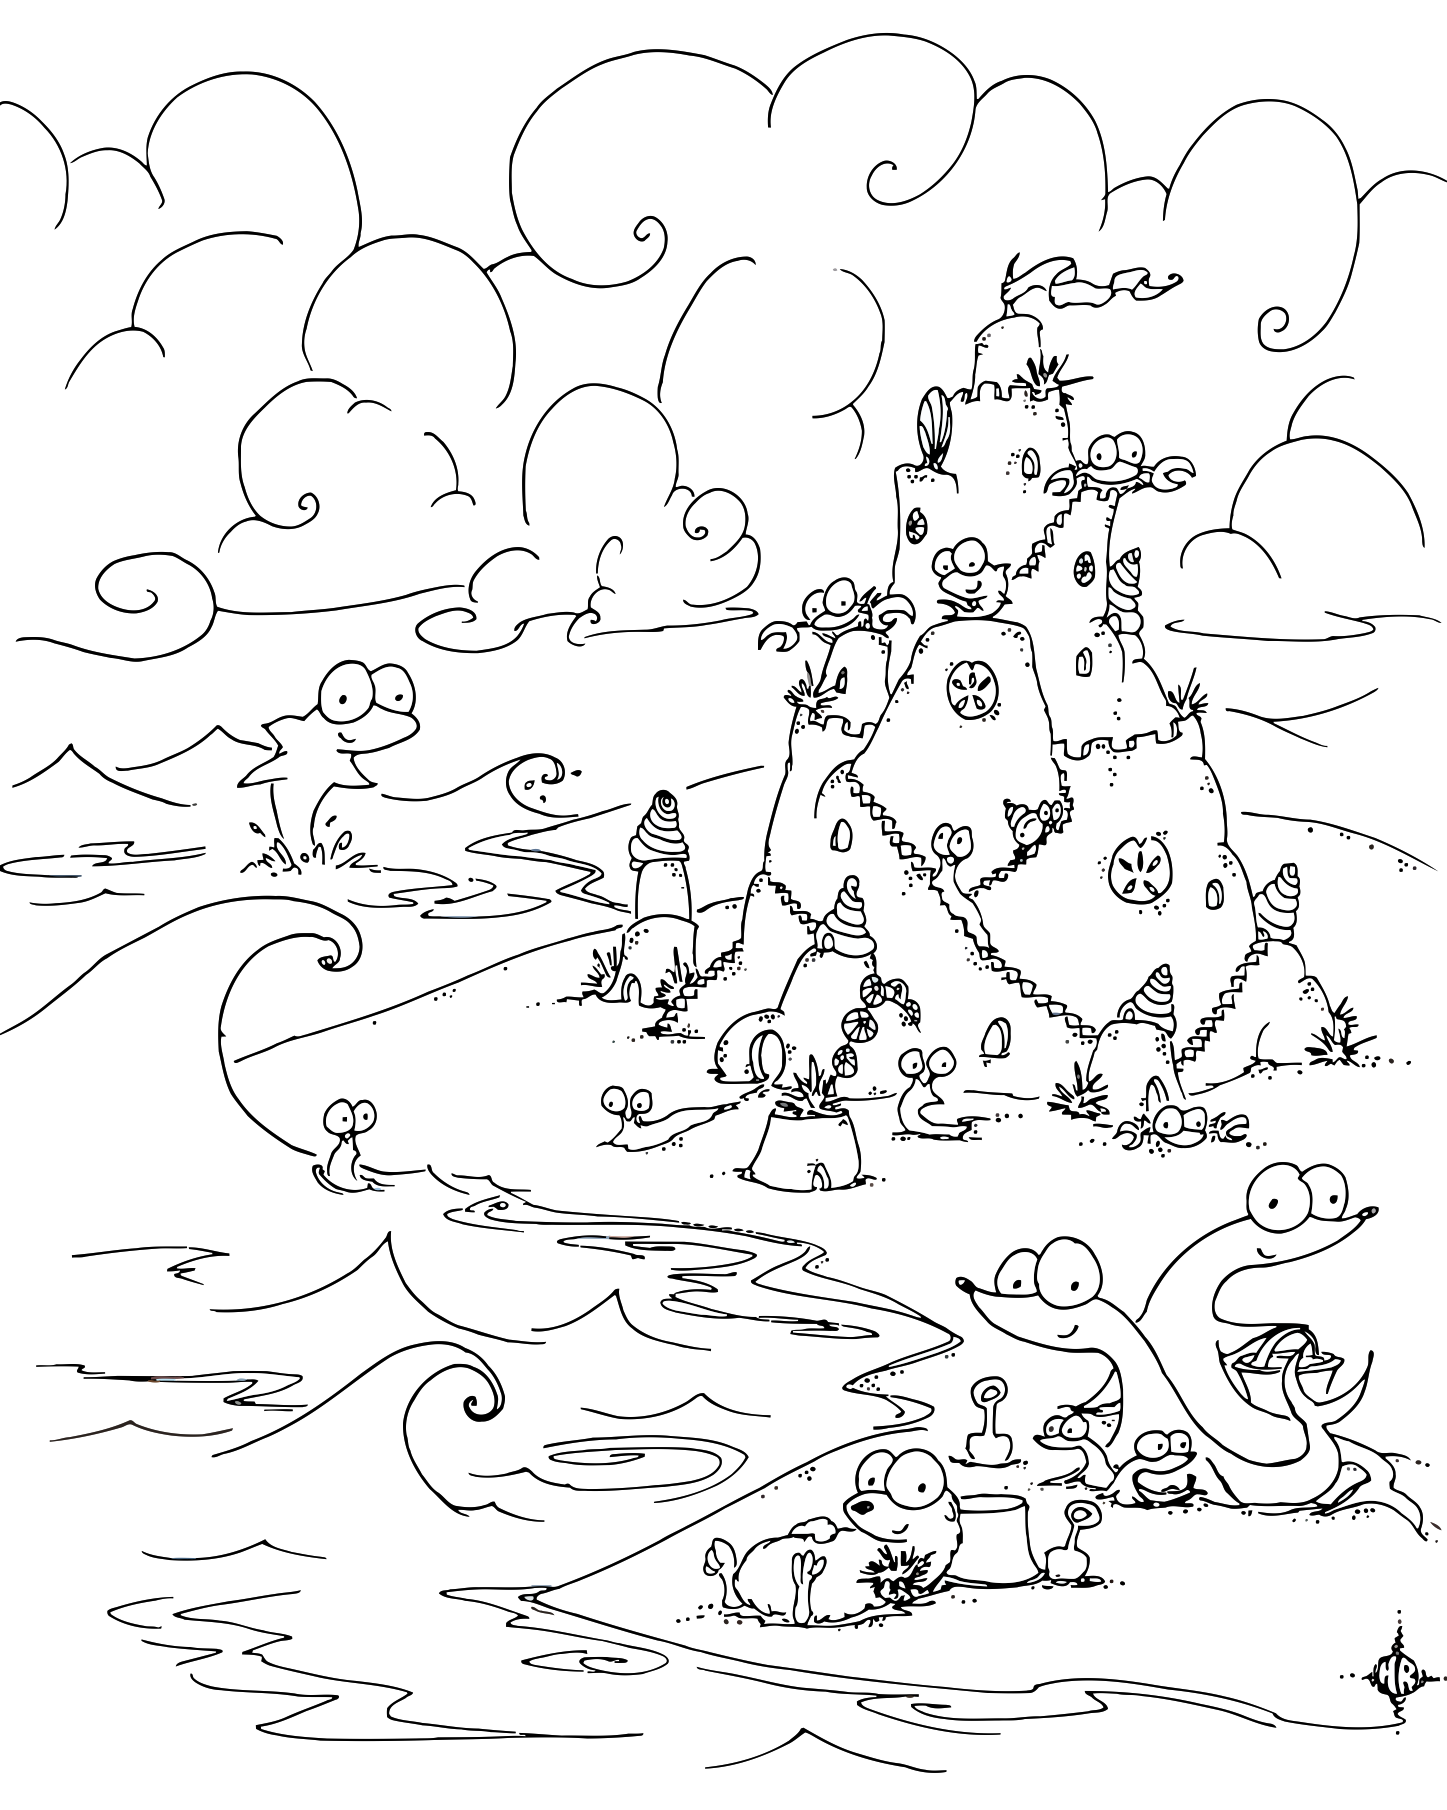 Coloring page sea creatures building a sand castle on the beach